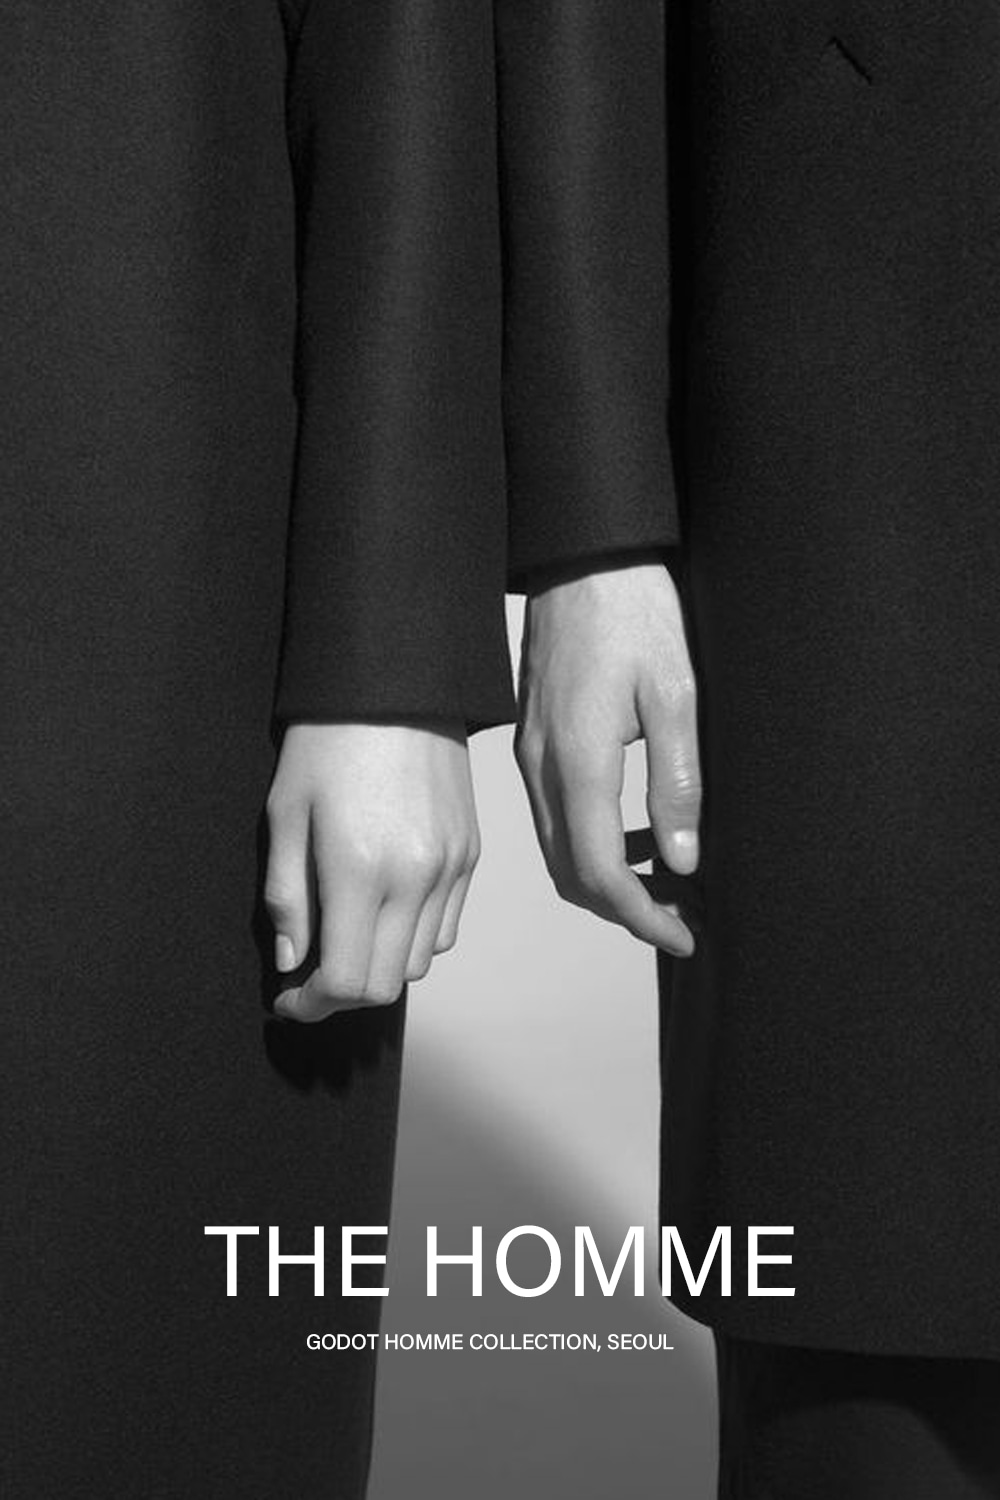 THE HOMME